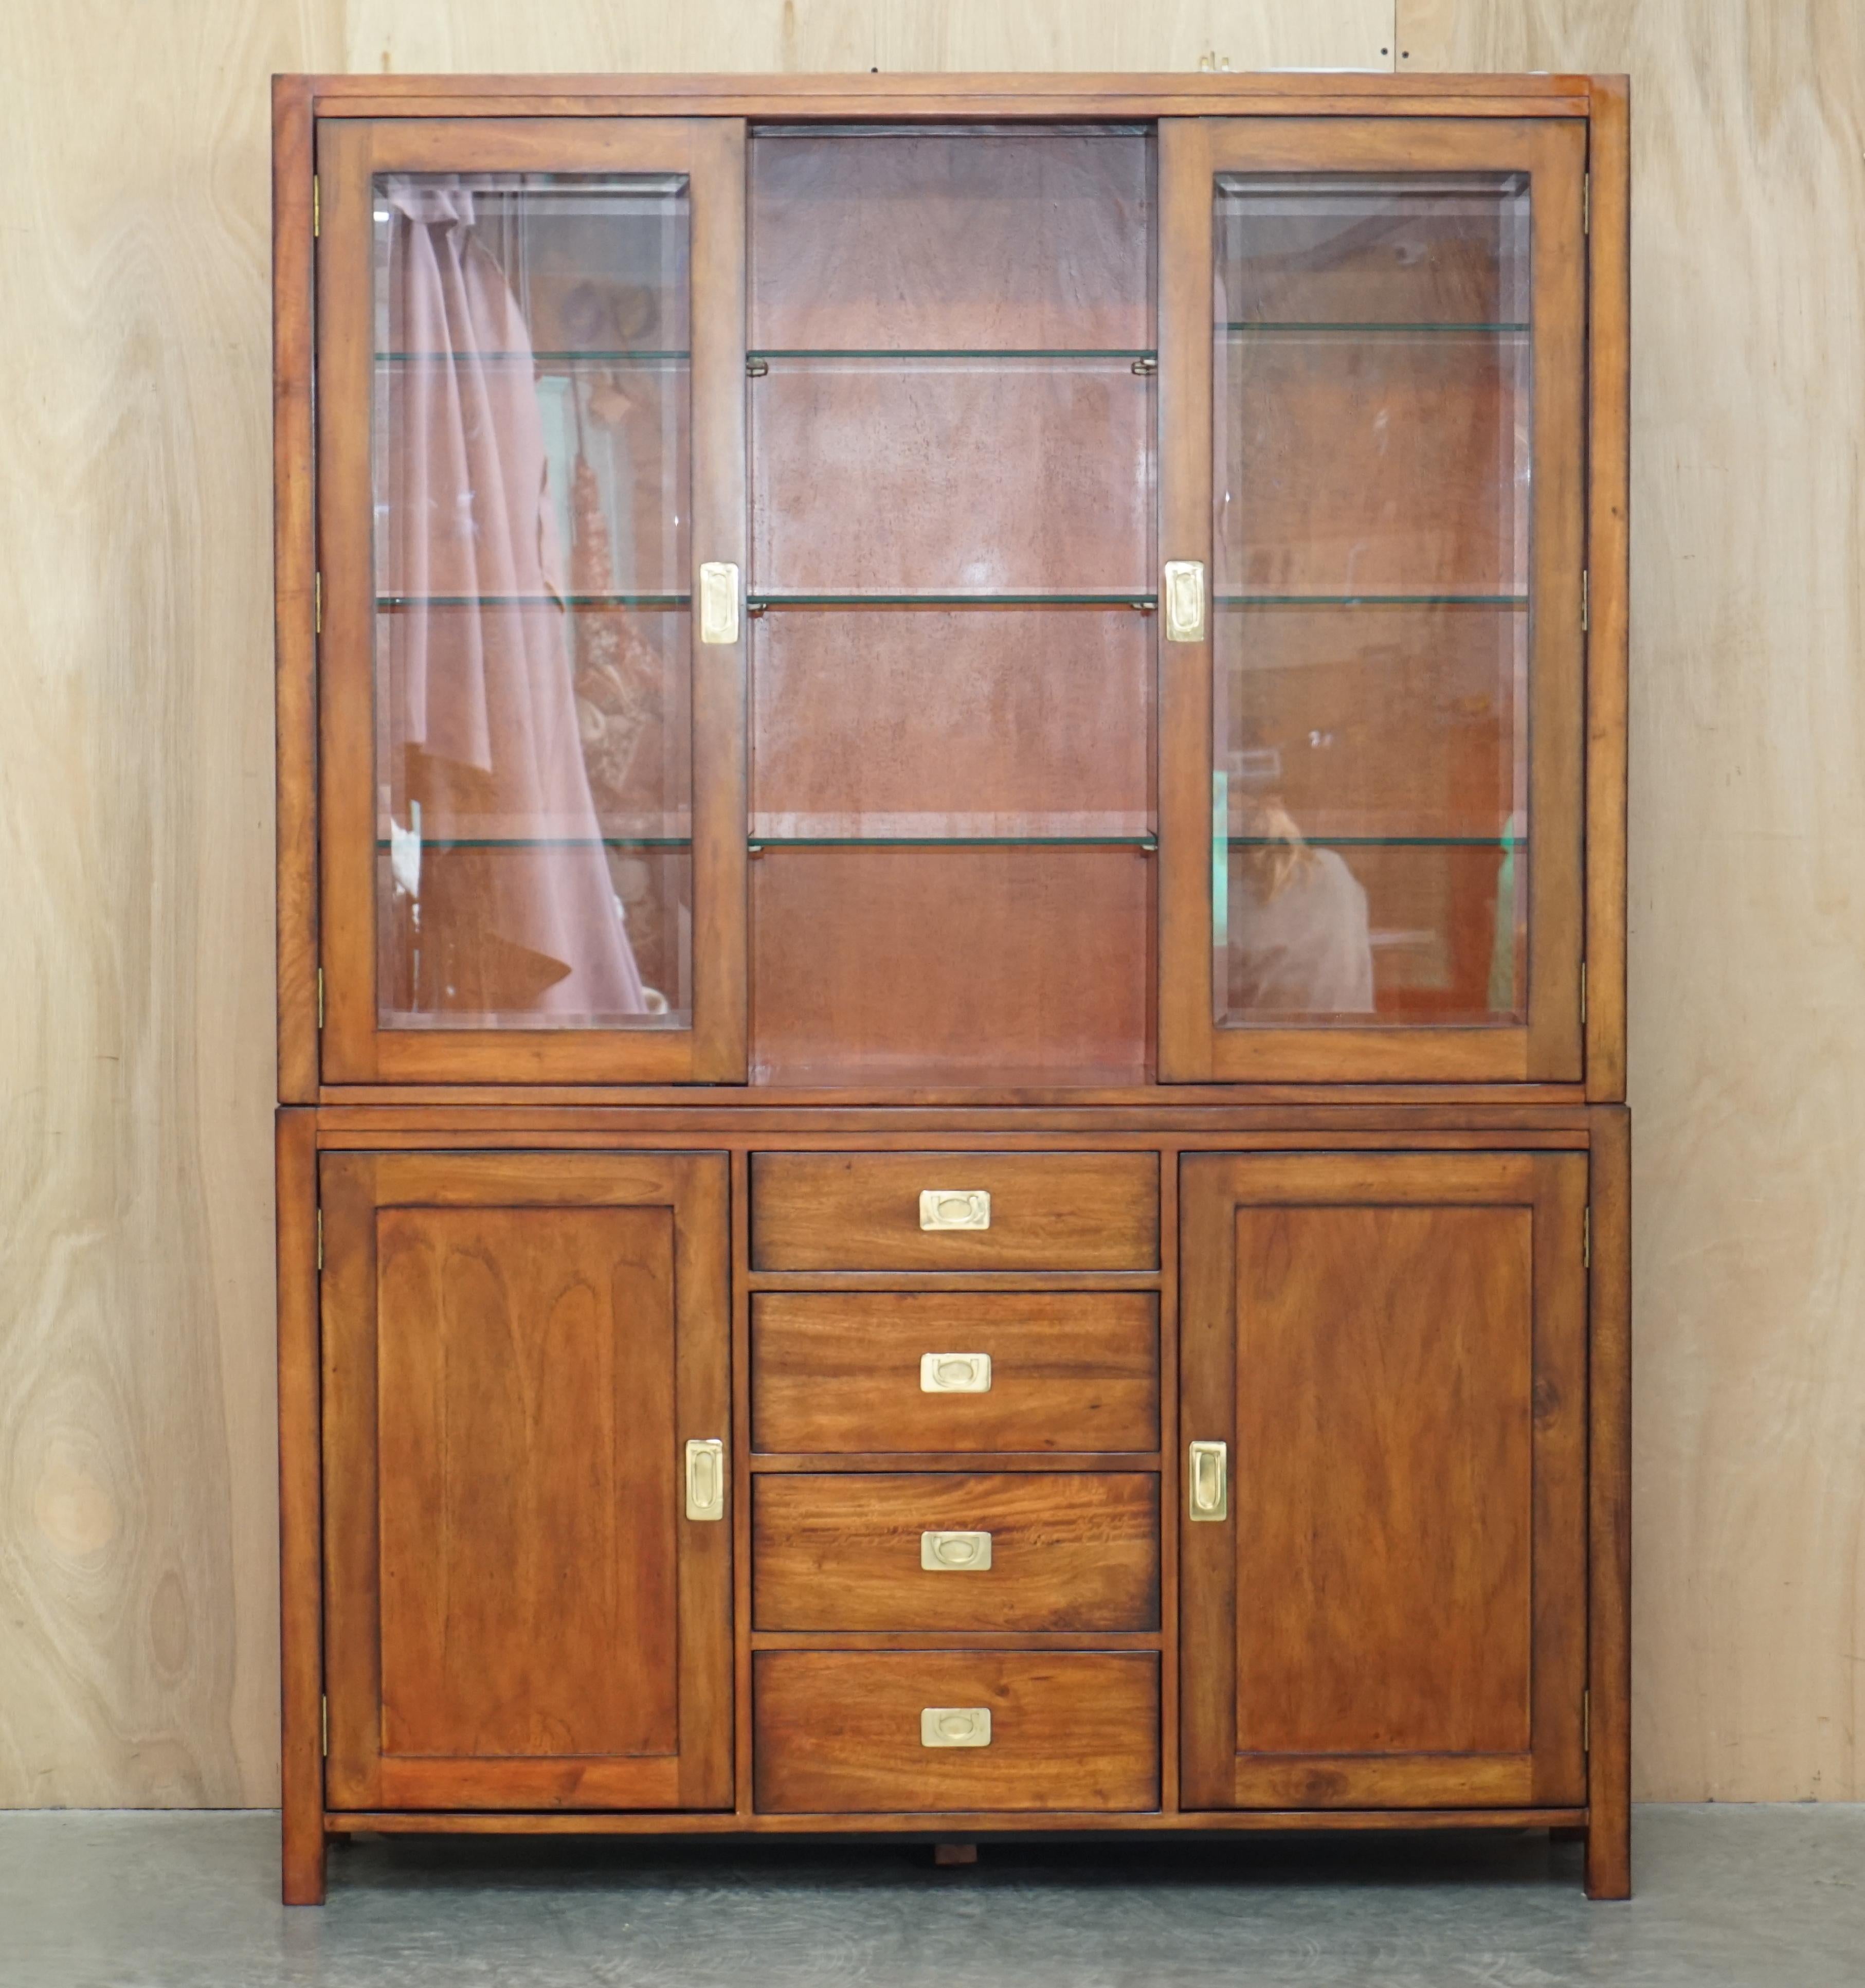 We are delighted to offer for sale this stunning Vintage Multiyork Military Campaign library bookcase with drawers and glass shelves finished with three spot lights 

Please note the delivery fee listed is just a guide, it covers within the M25